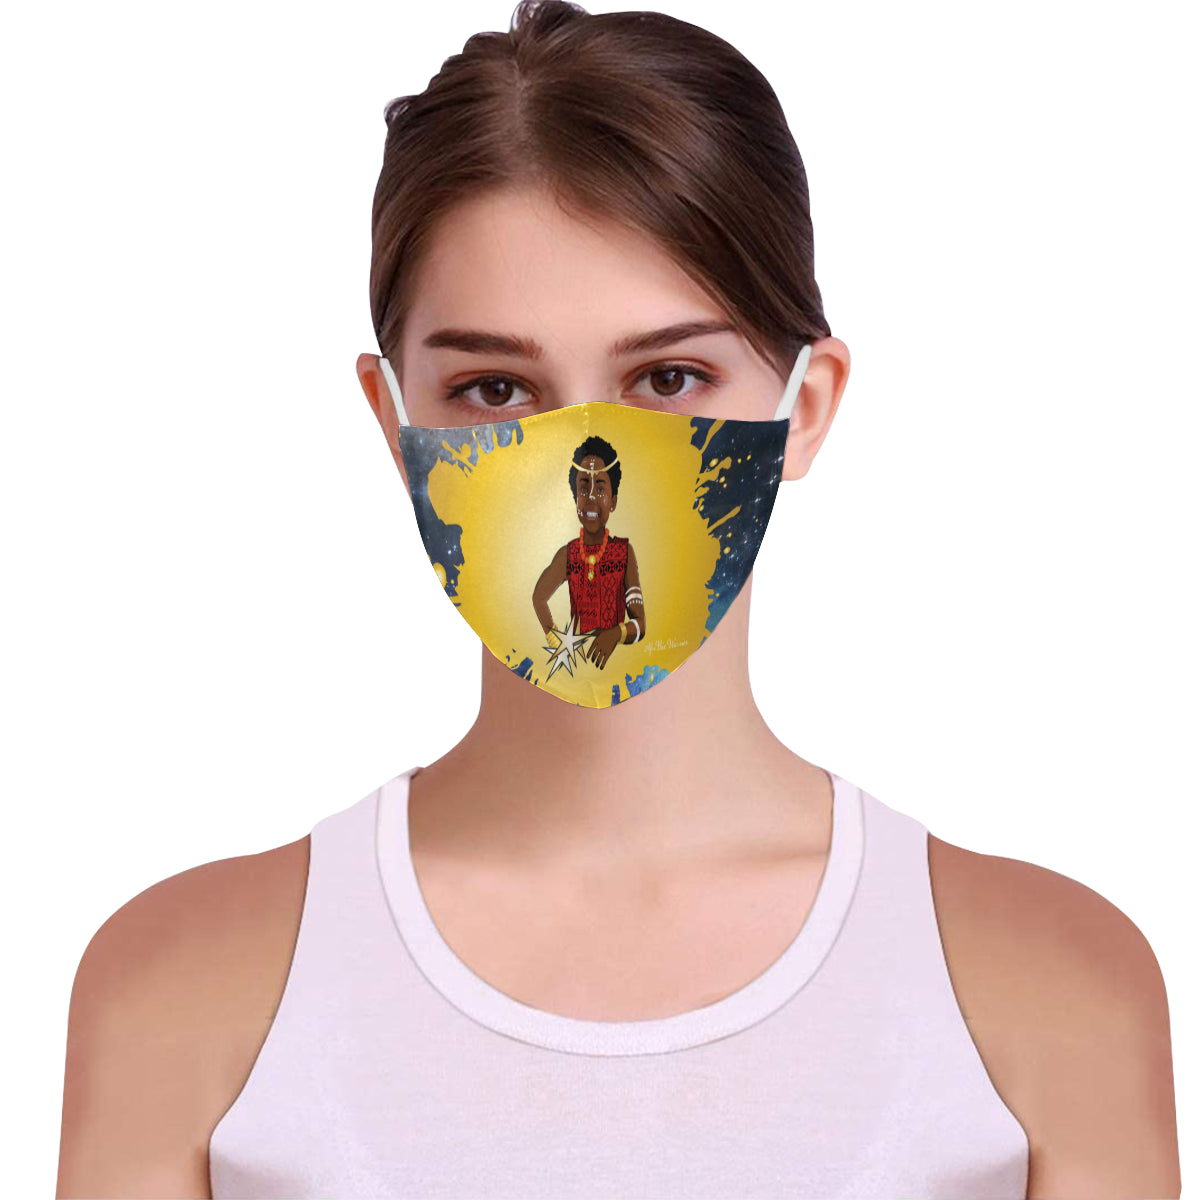 AfriBix Warrior Girl splash Cotton Fabric Face Mask with Filter Slot & Adjustable Strap - Non-medical use (2 Filters Included)